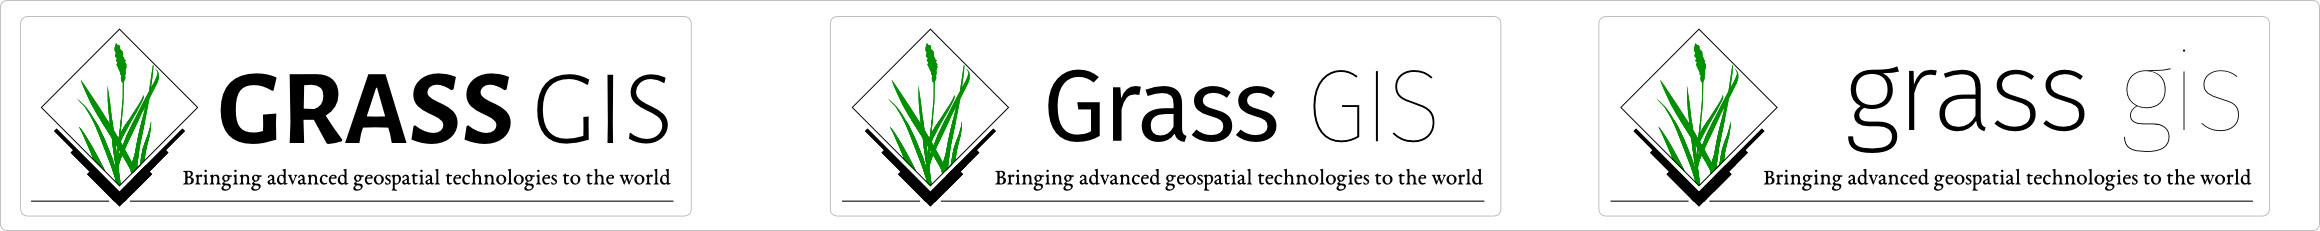 GRASSGIS welcome synthesis.jpg